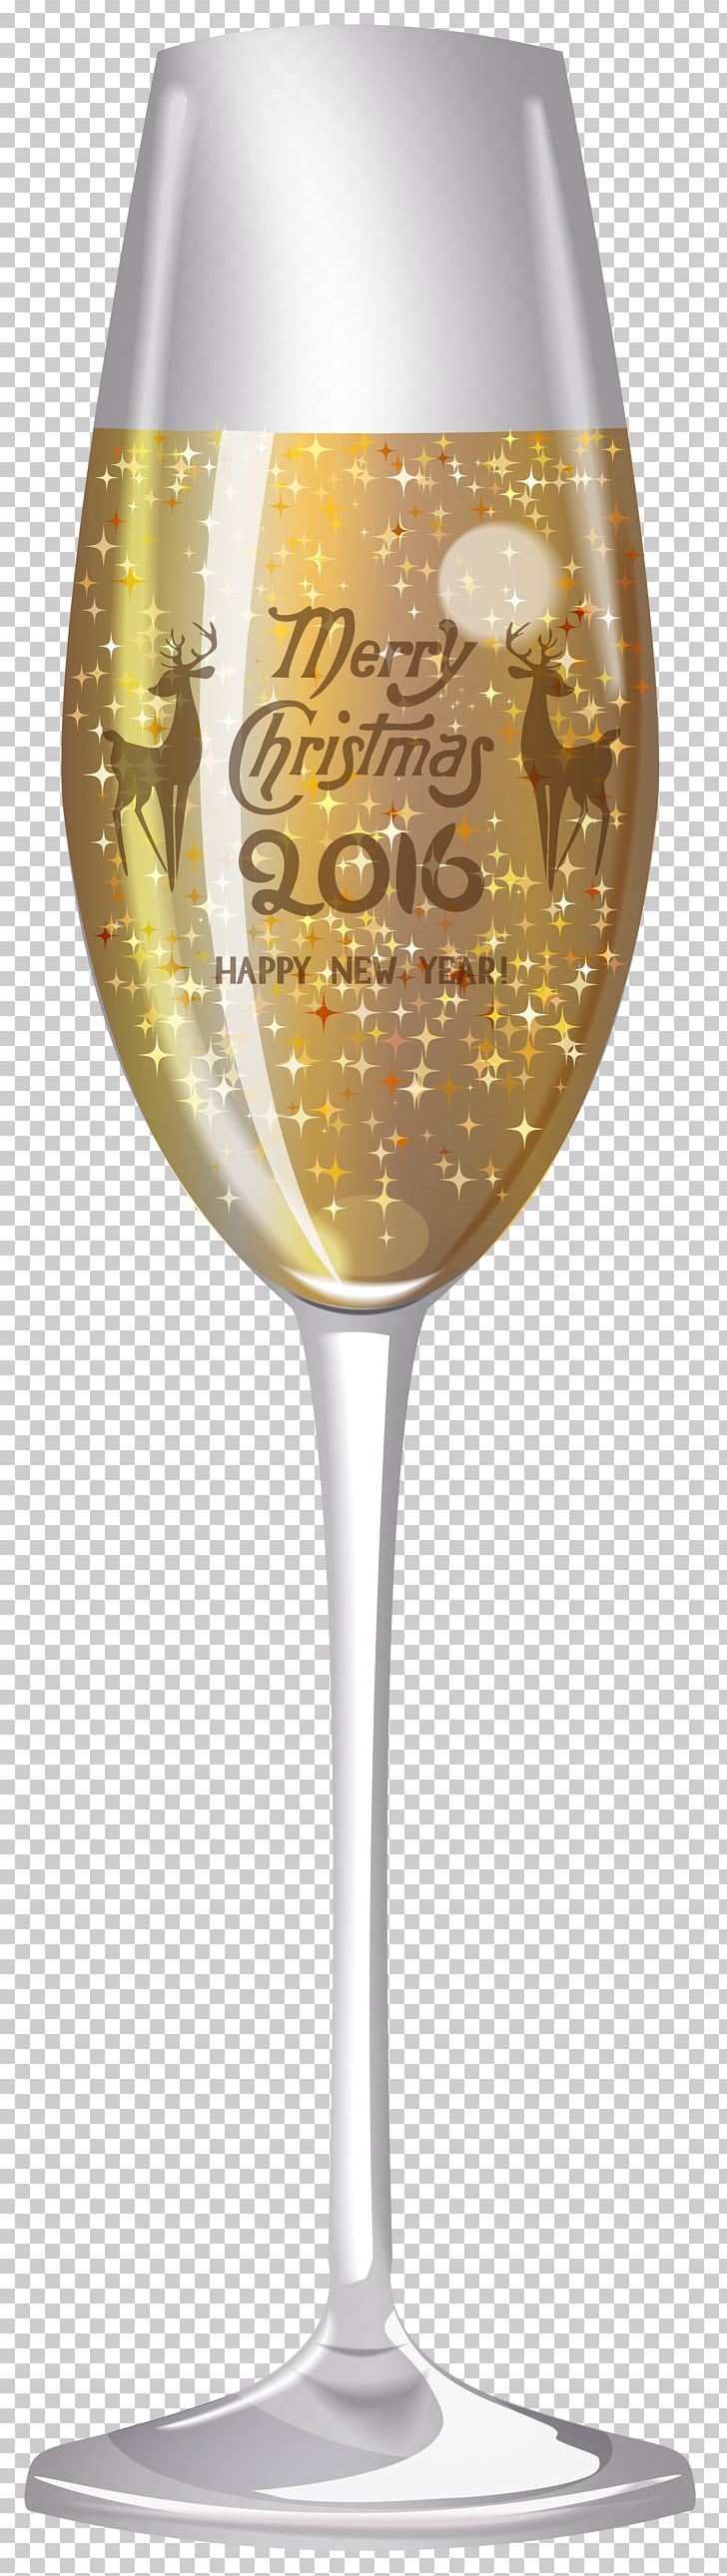 White Wine Champagne Glass Wine Glass PNG, Clipart, Beer Glass, Bottle, Champagne, Champagne Glass, Champagne Stemware Free PNG Download